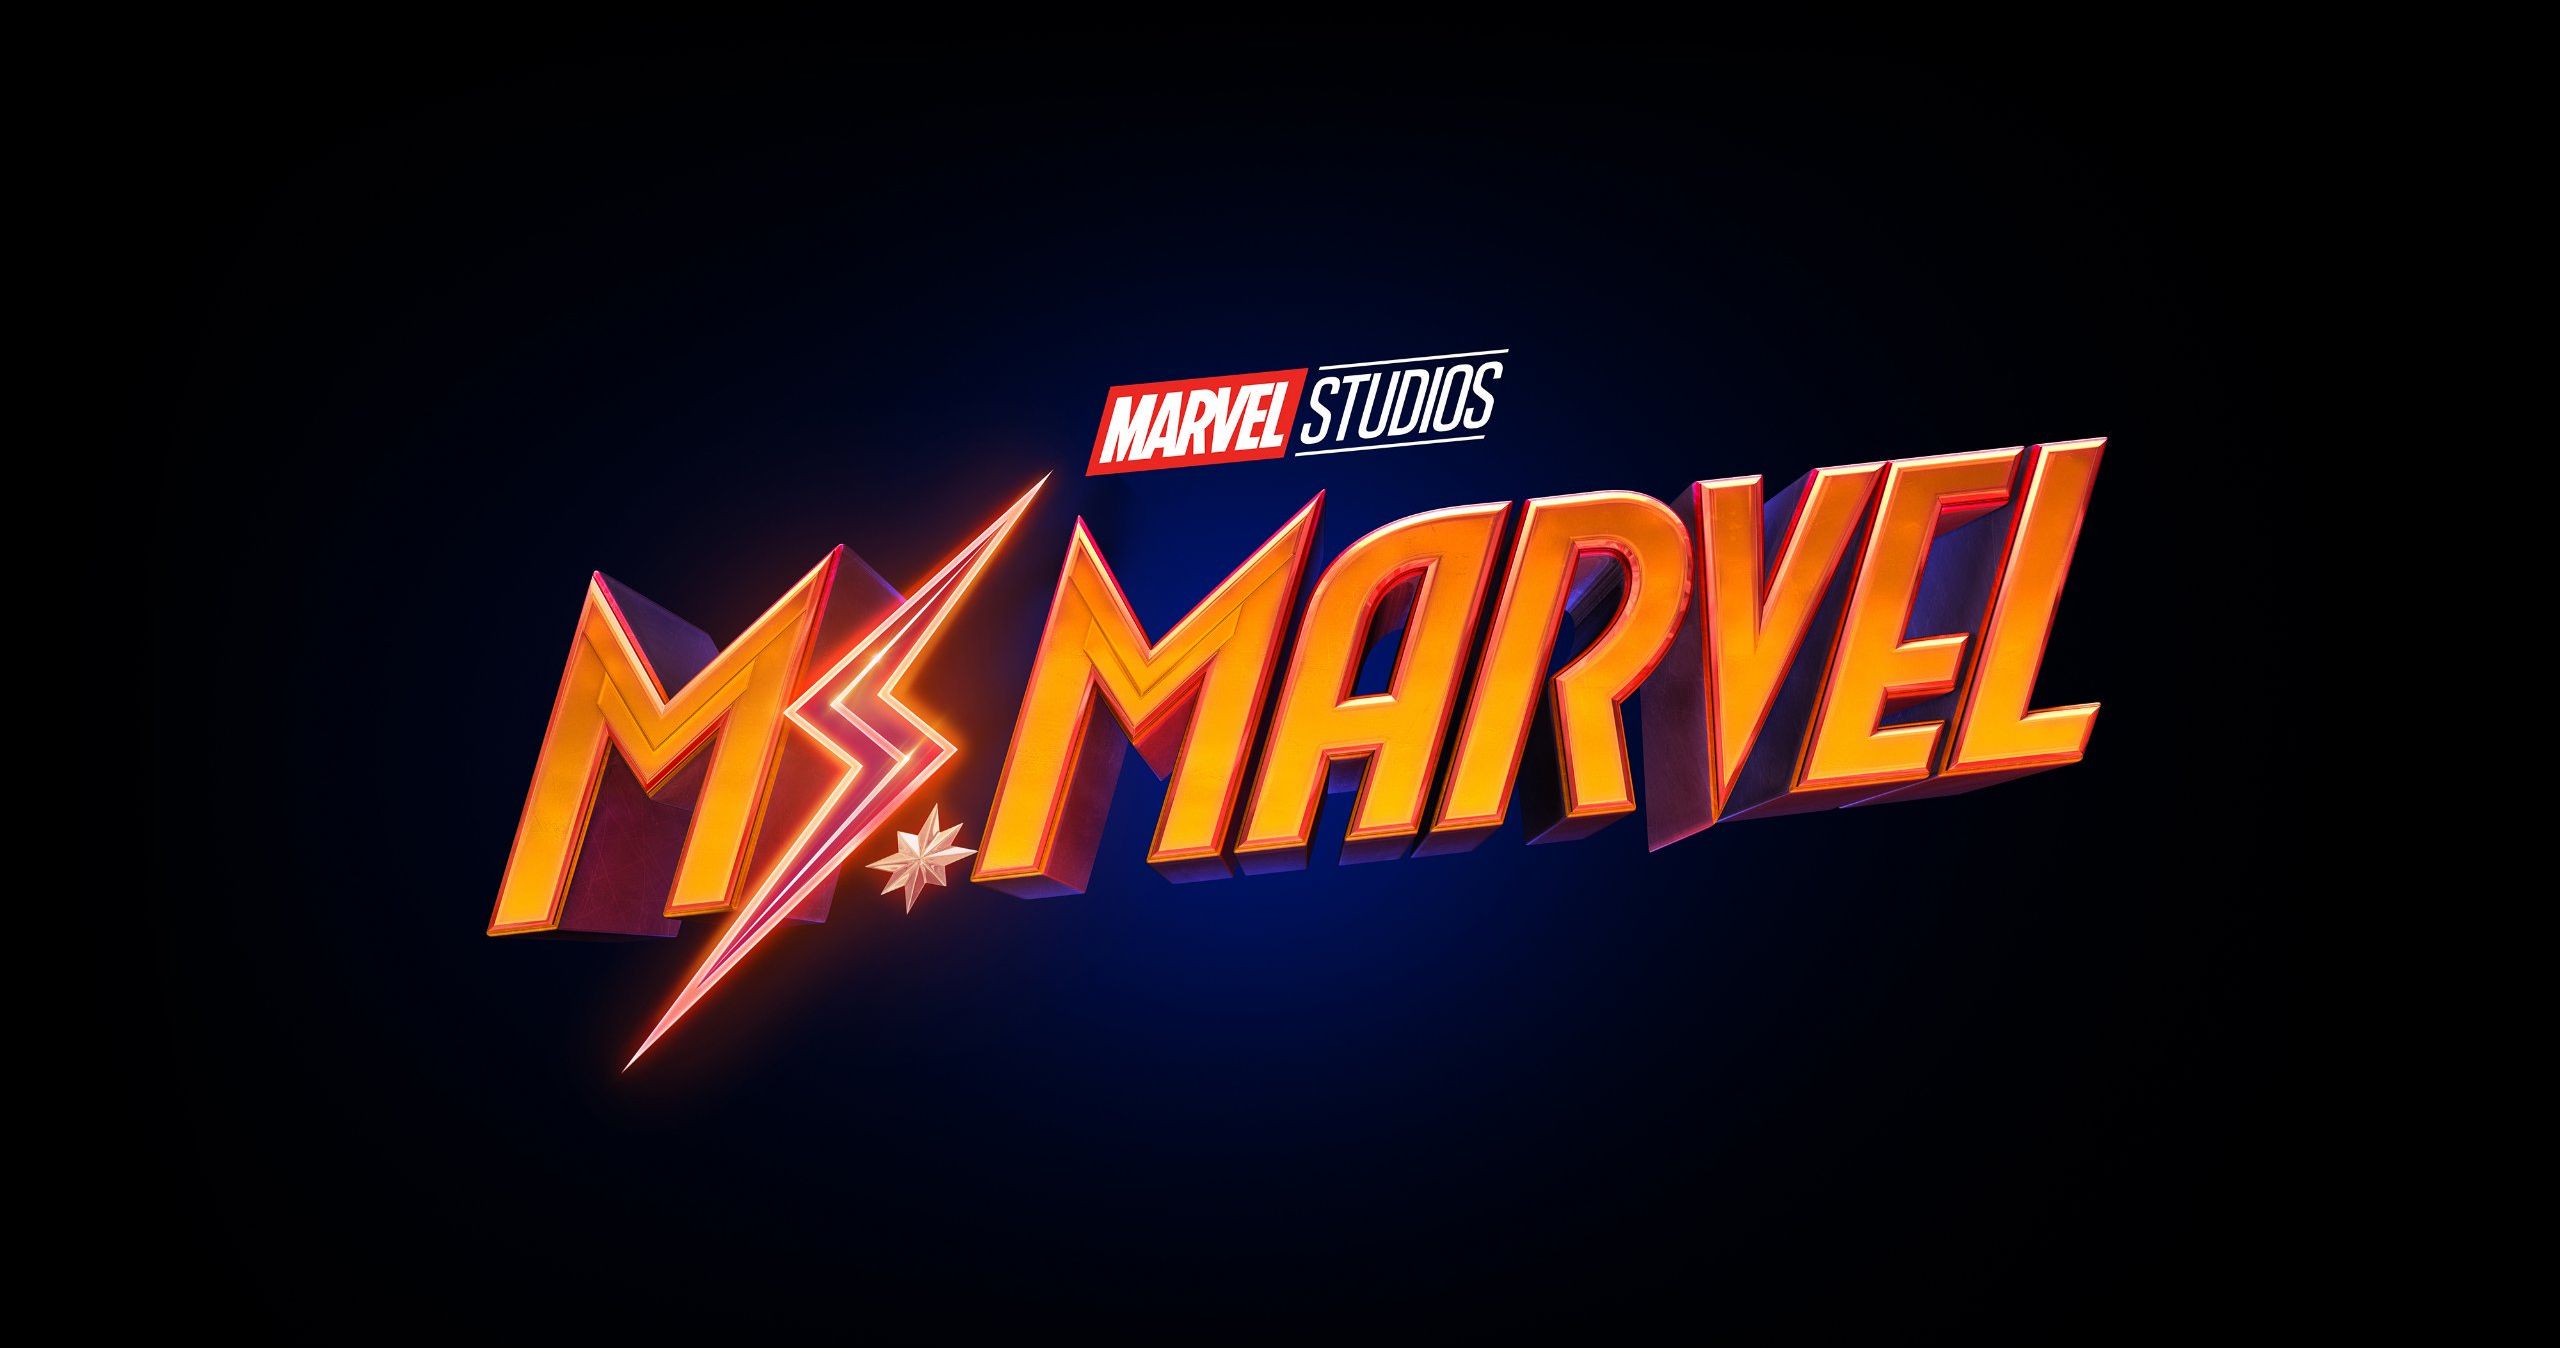 Ms. Marvel TV Show Is Coming to Disney+